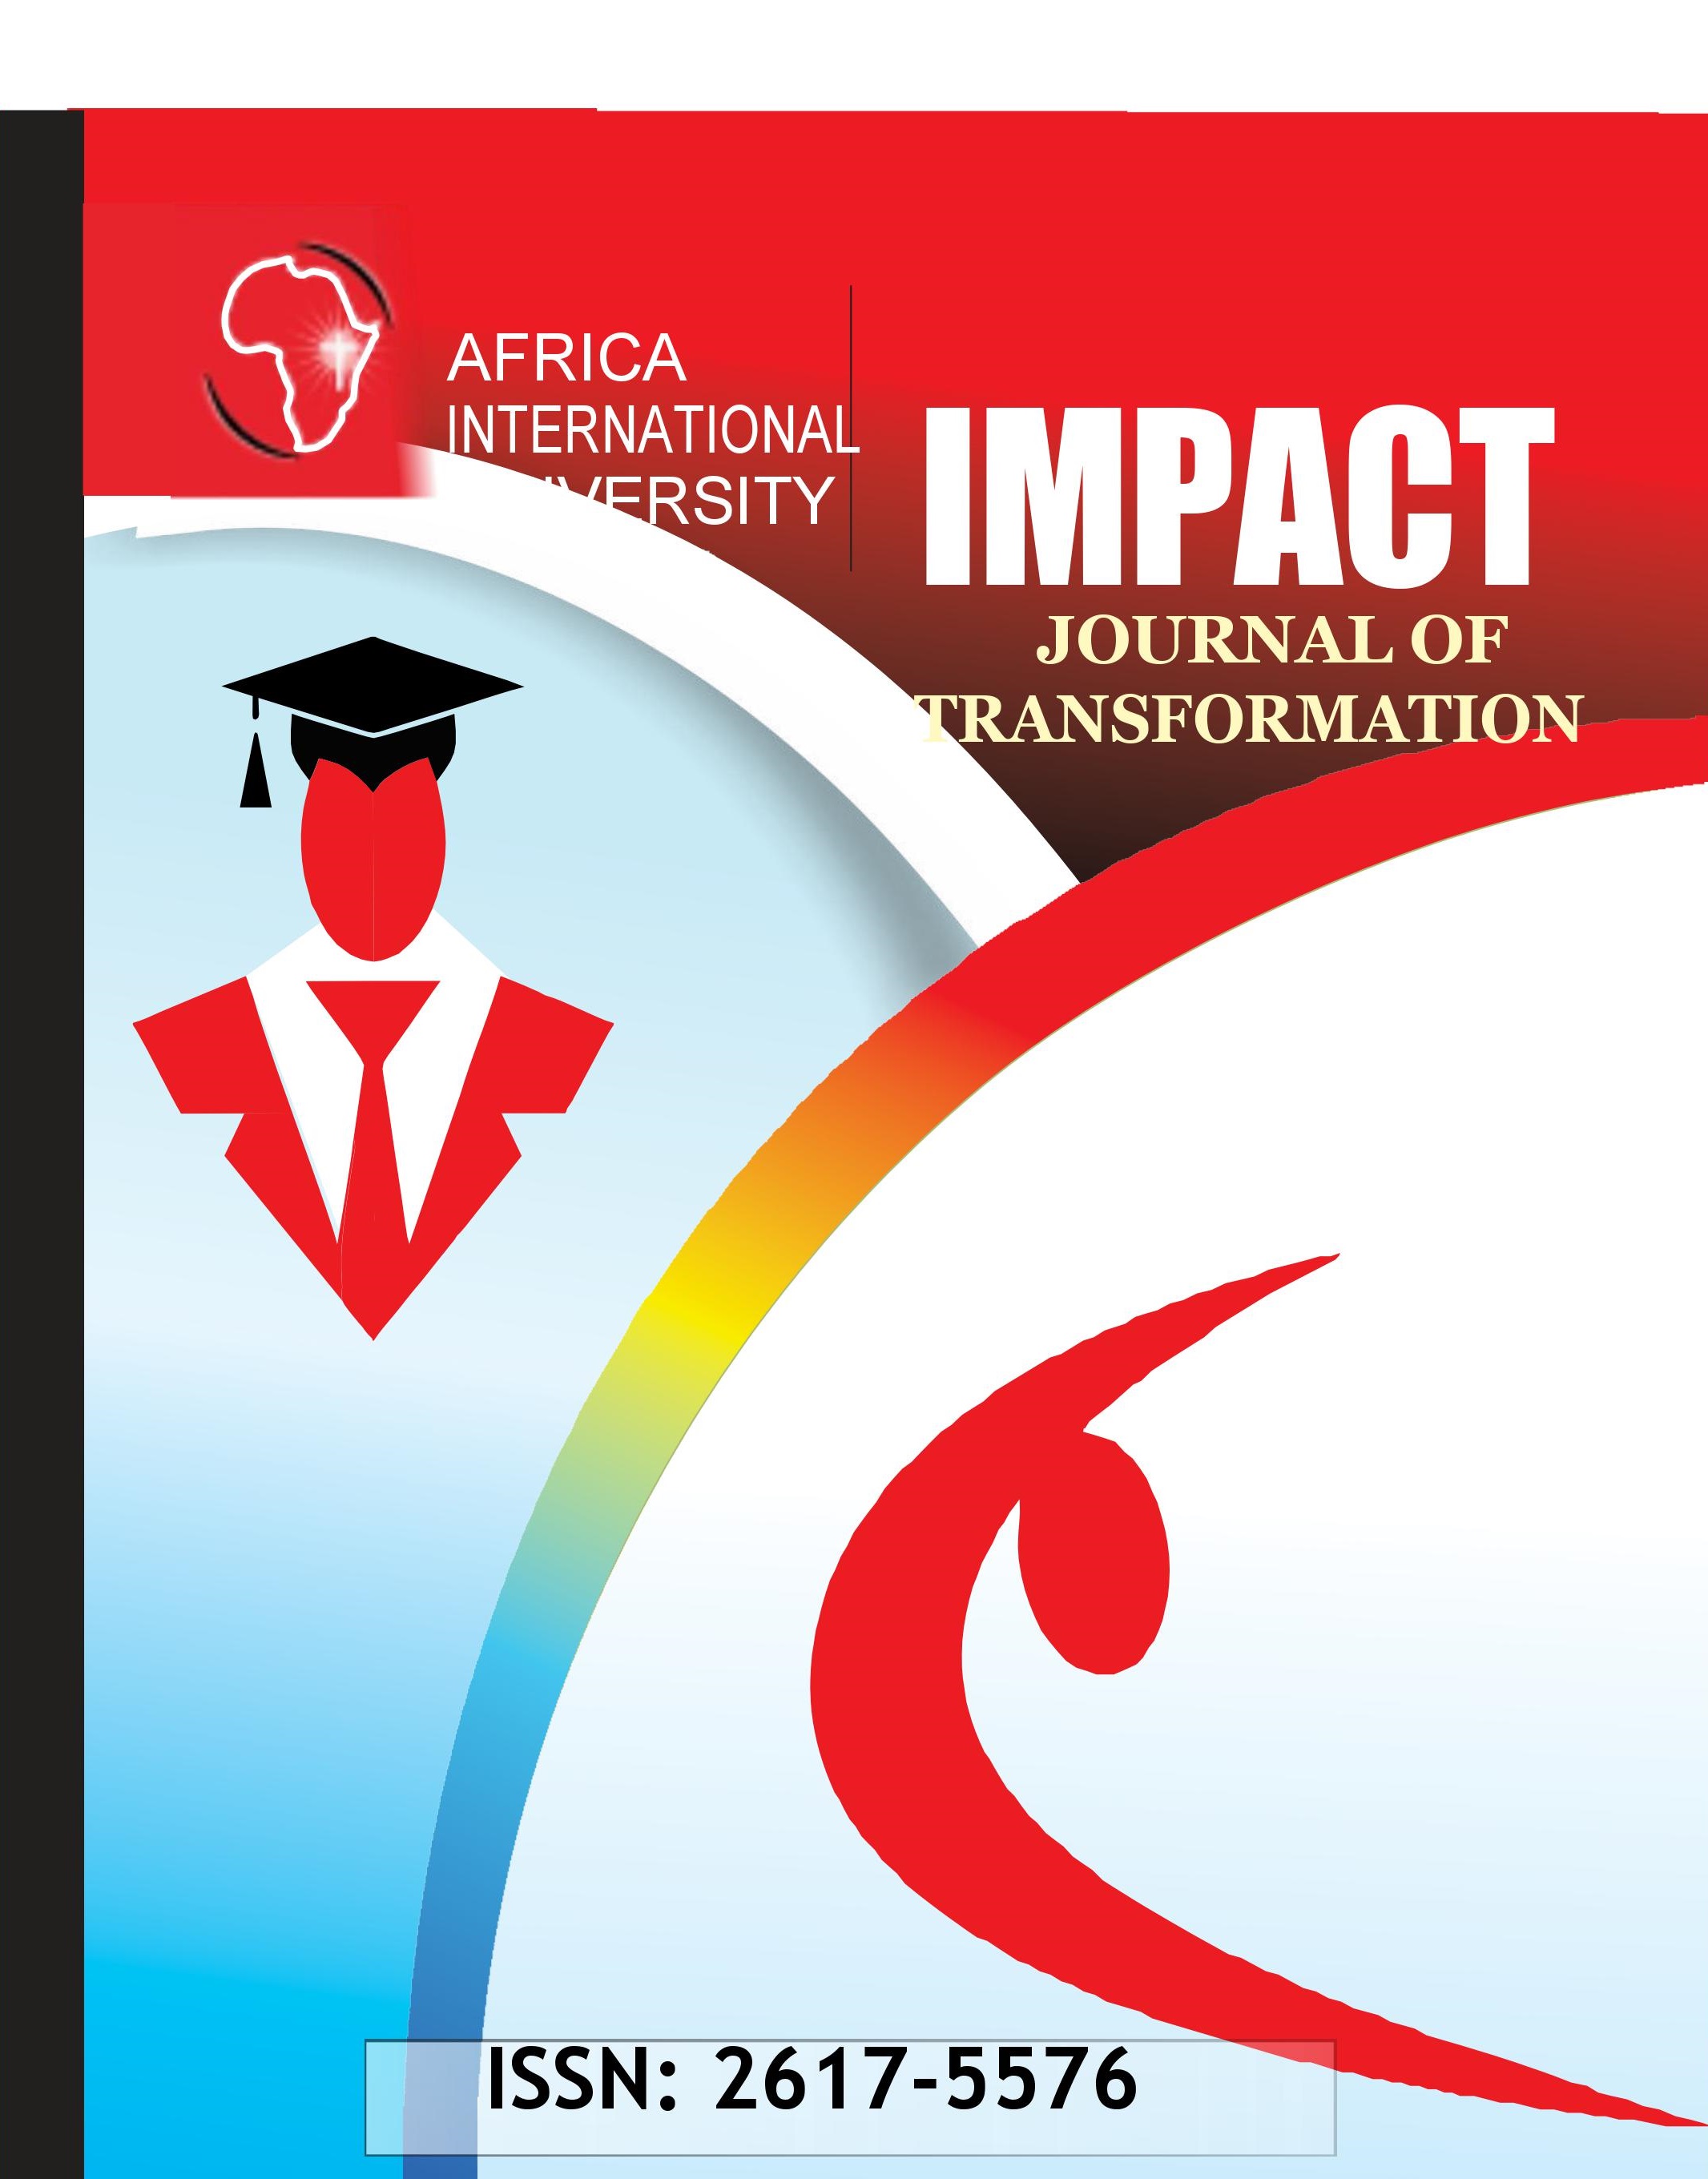 					View Vol. 3 No. 1 (2020): Impact: Journal of Transformation
				